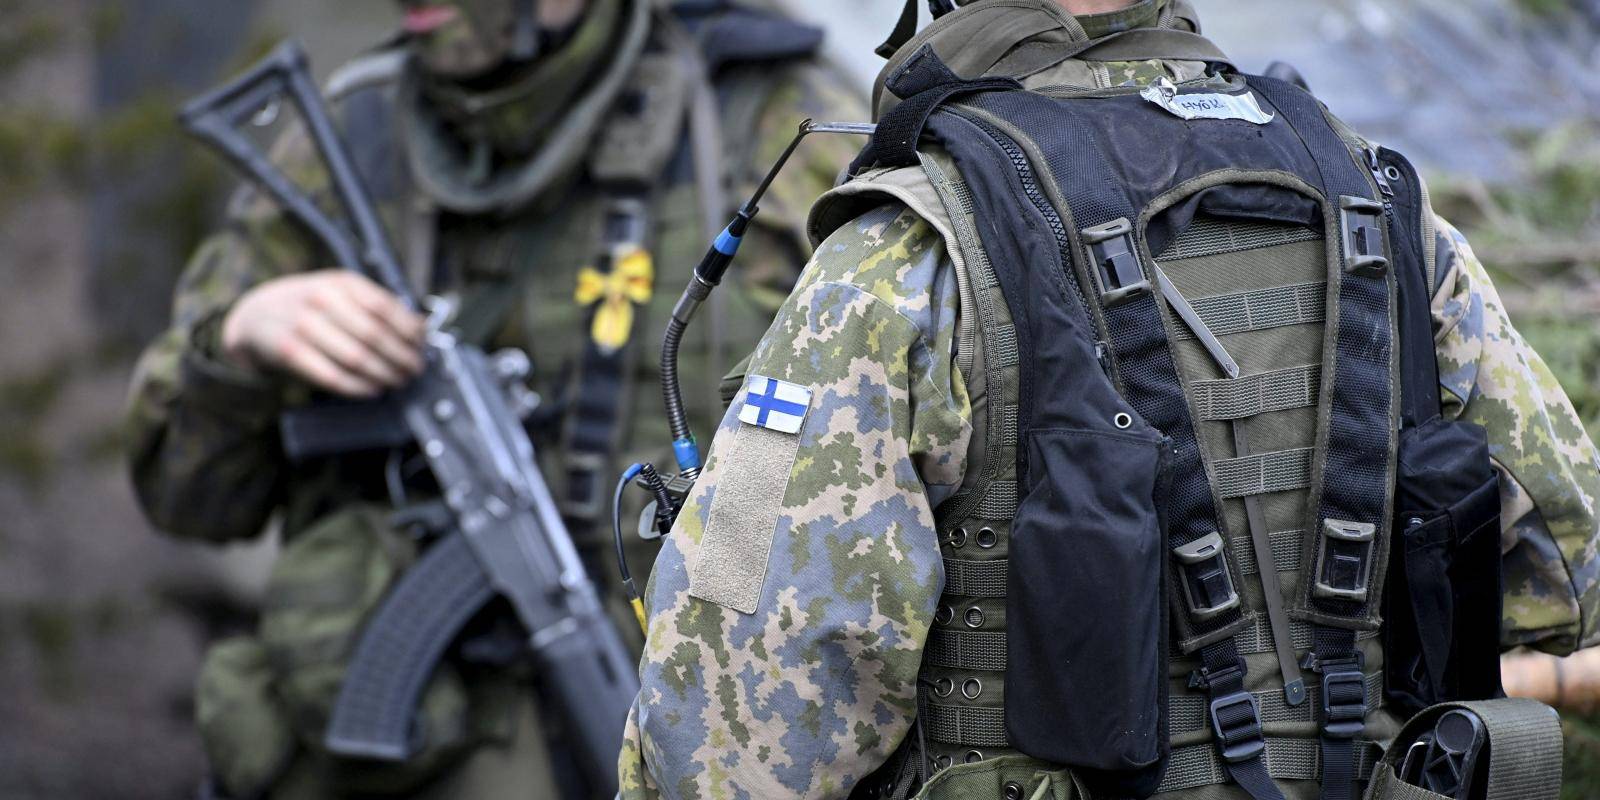 Finland hands over new classified weapons of its own design to Ukraine